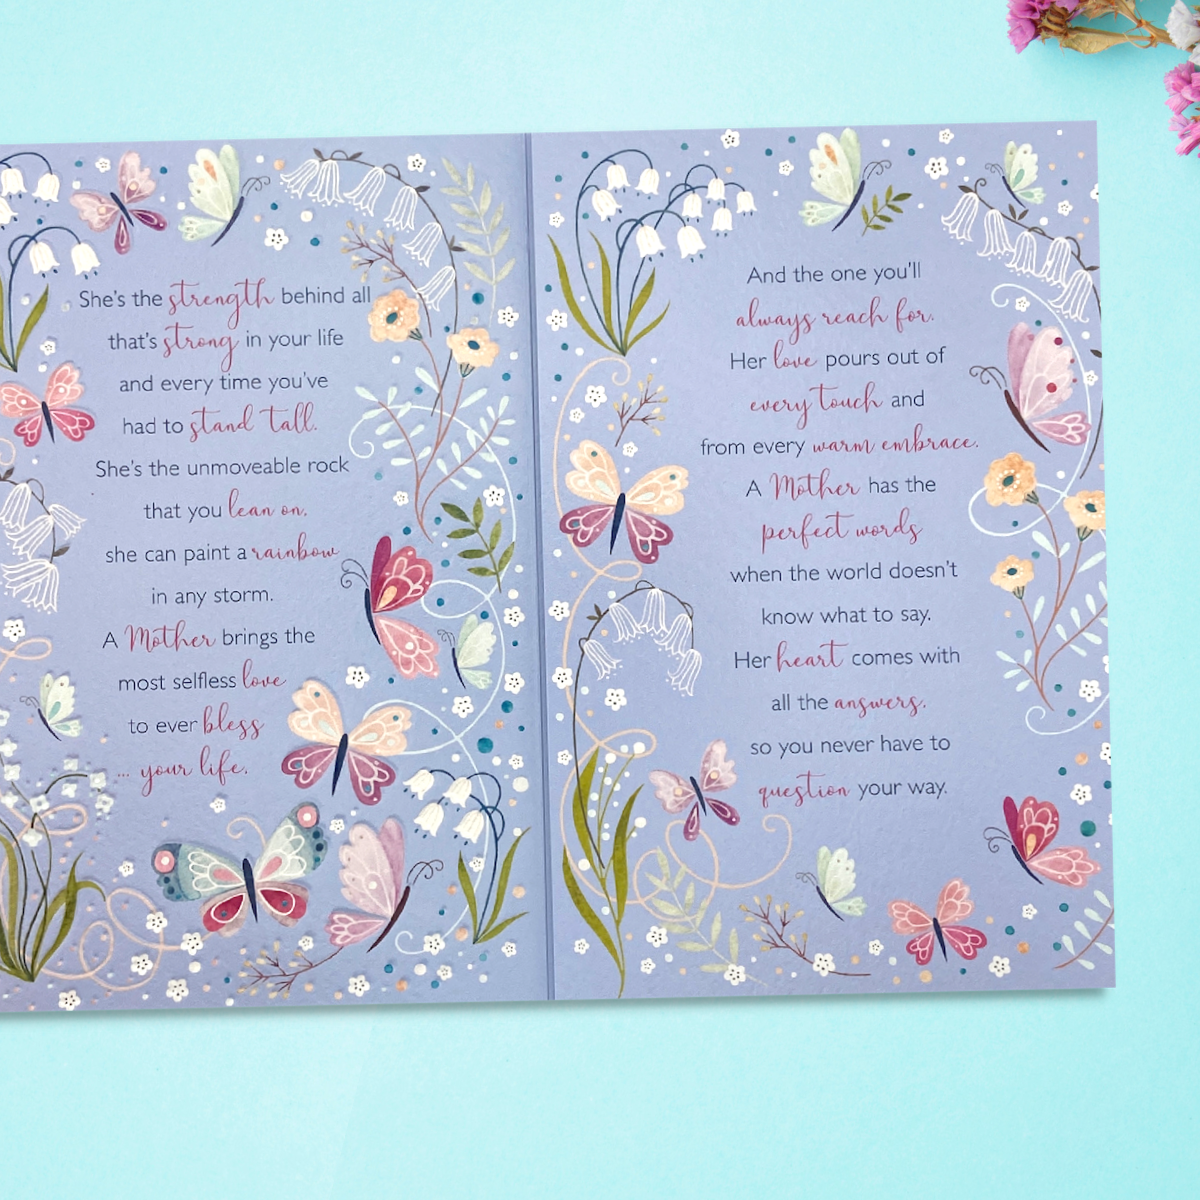 Inside images with lilac card, floral border and text